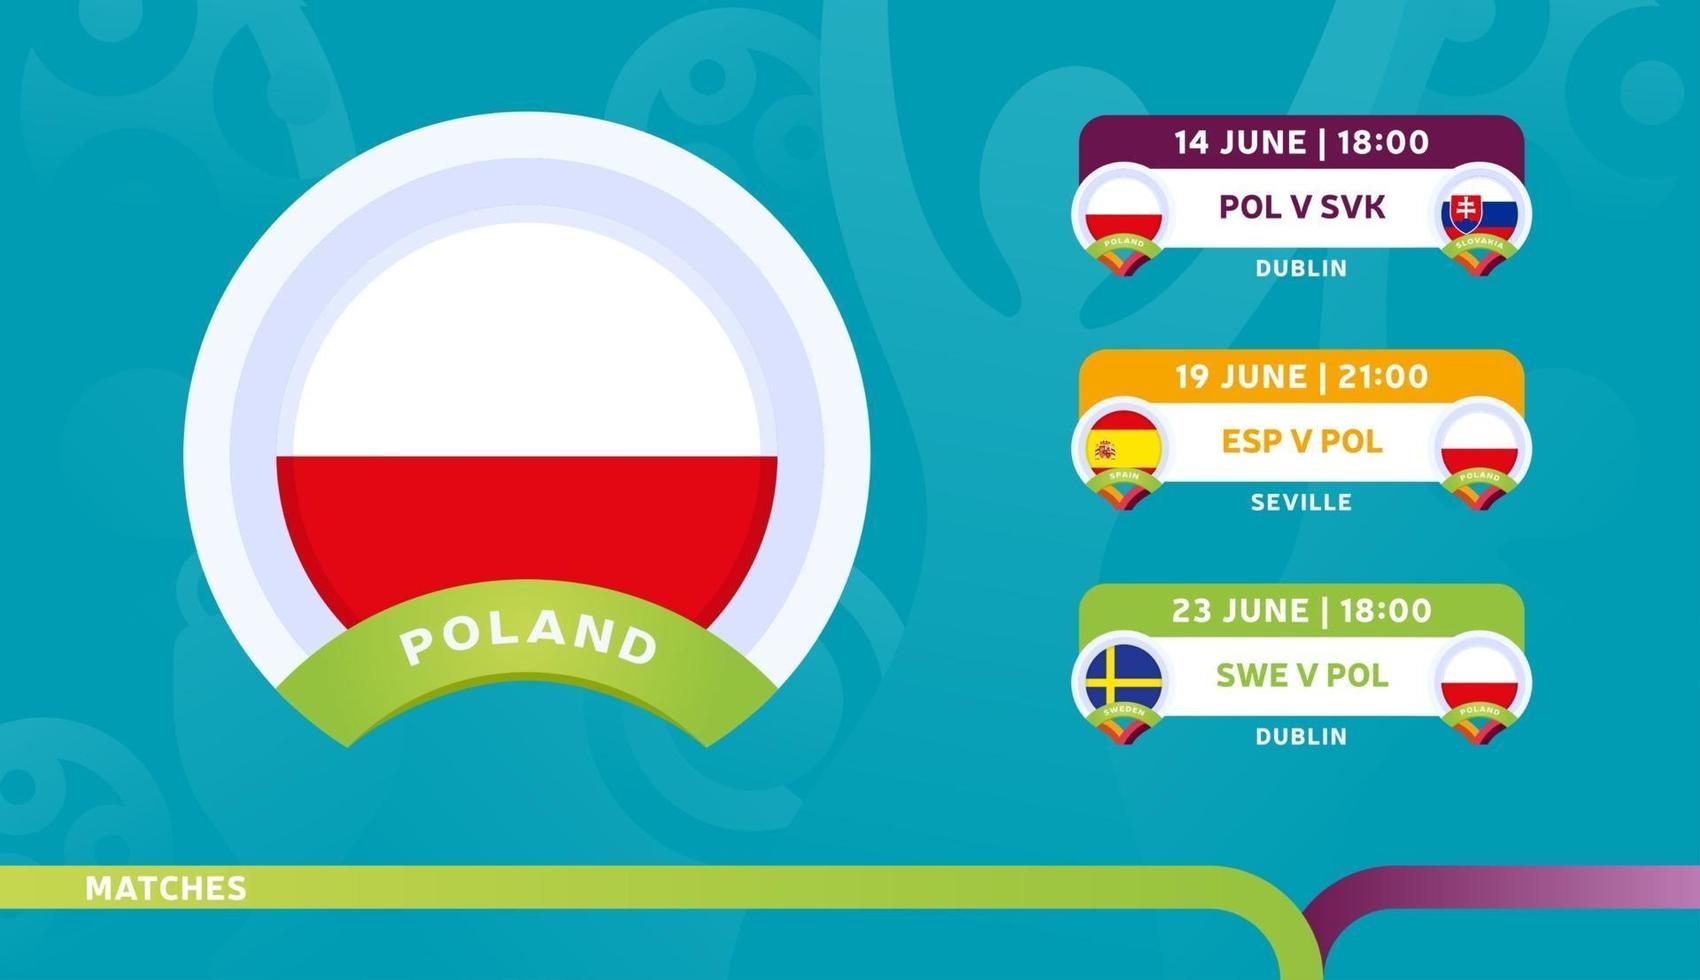 poland national team Schedule matches in the final stage at the 2020 Football Championship Vector illustration of football 2020 matches